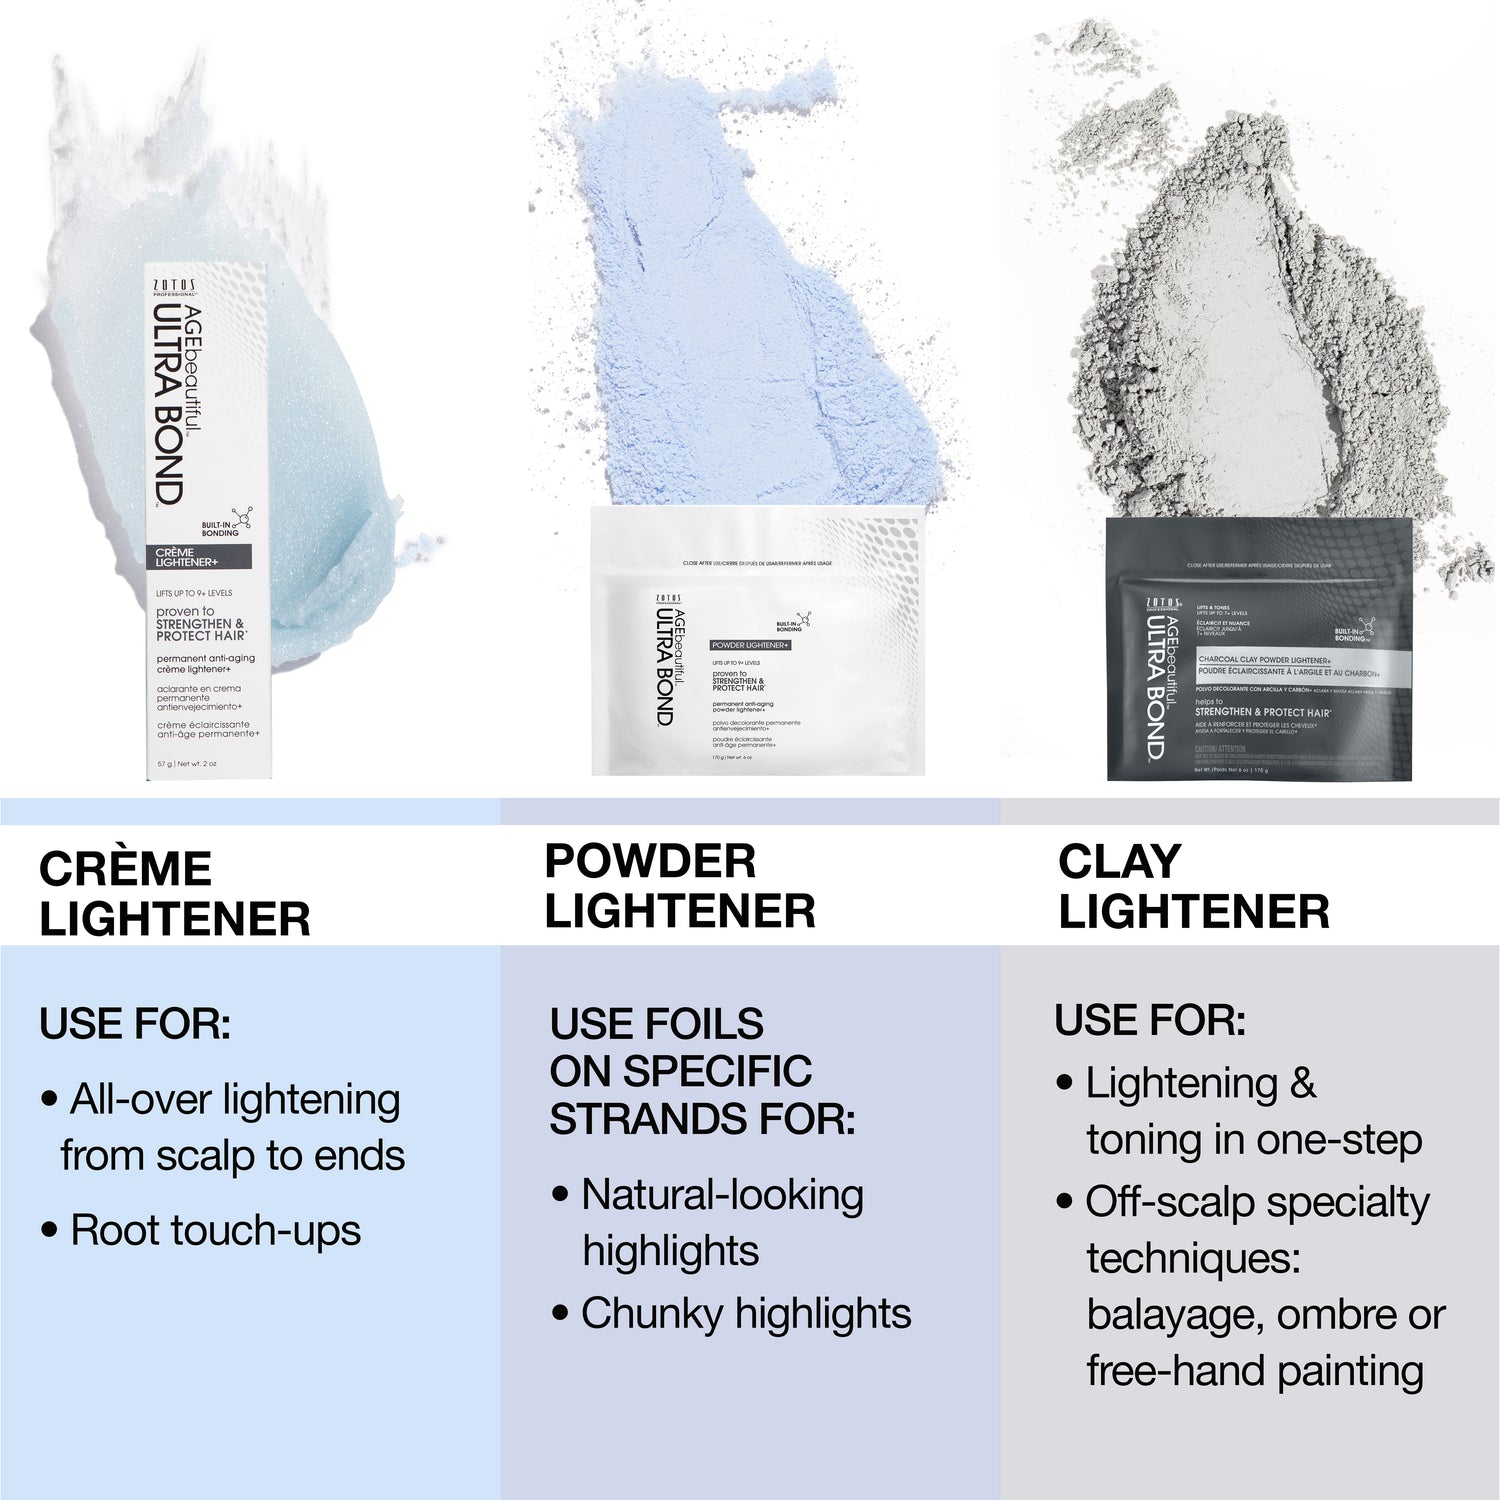  Use clay lightener for lightening and toning in one step and off-scalp specialty techniques (balayage, ombre or free-hand painting).